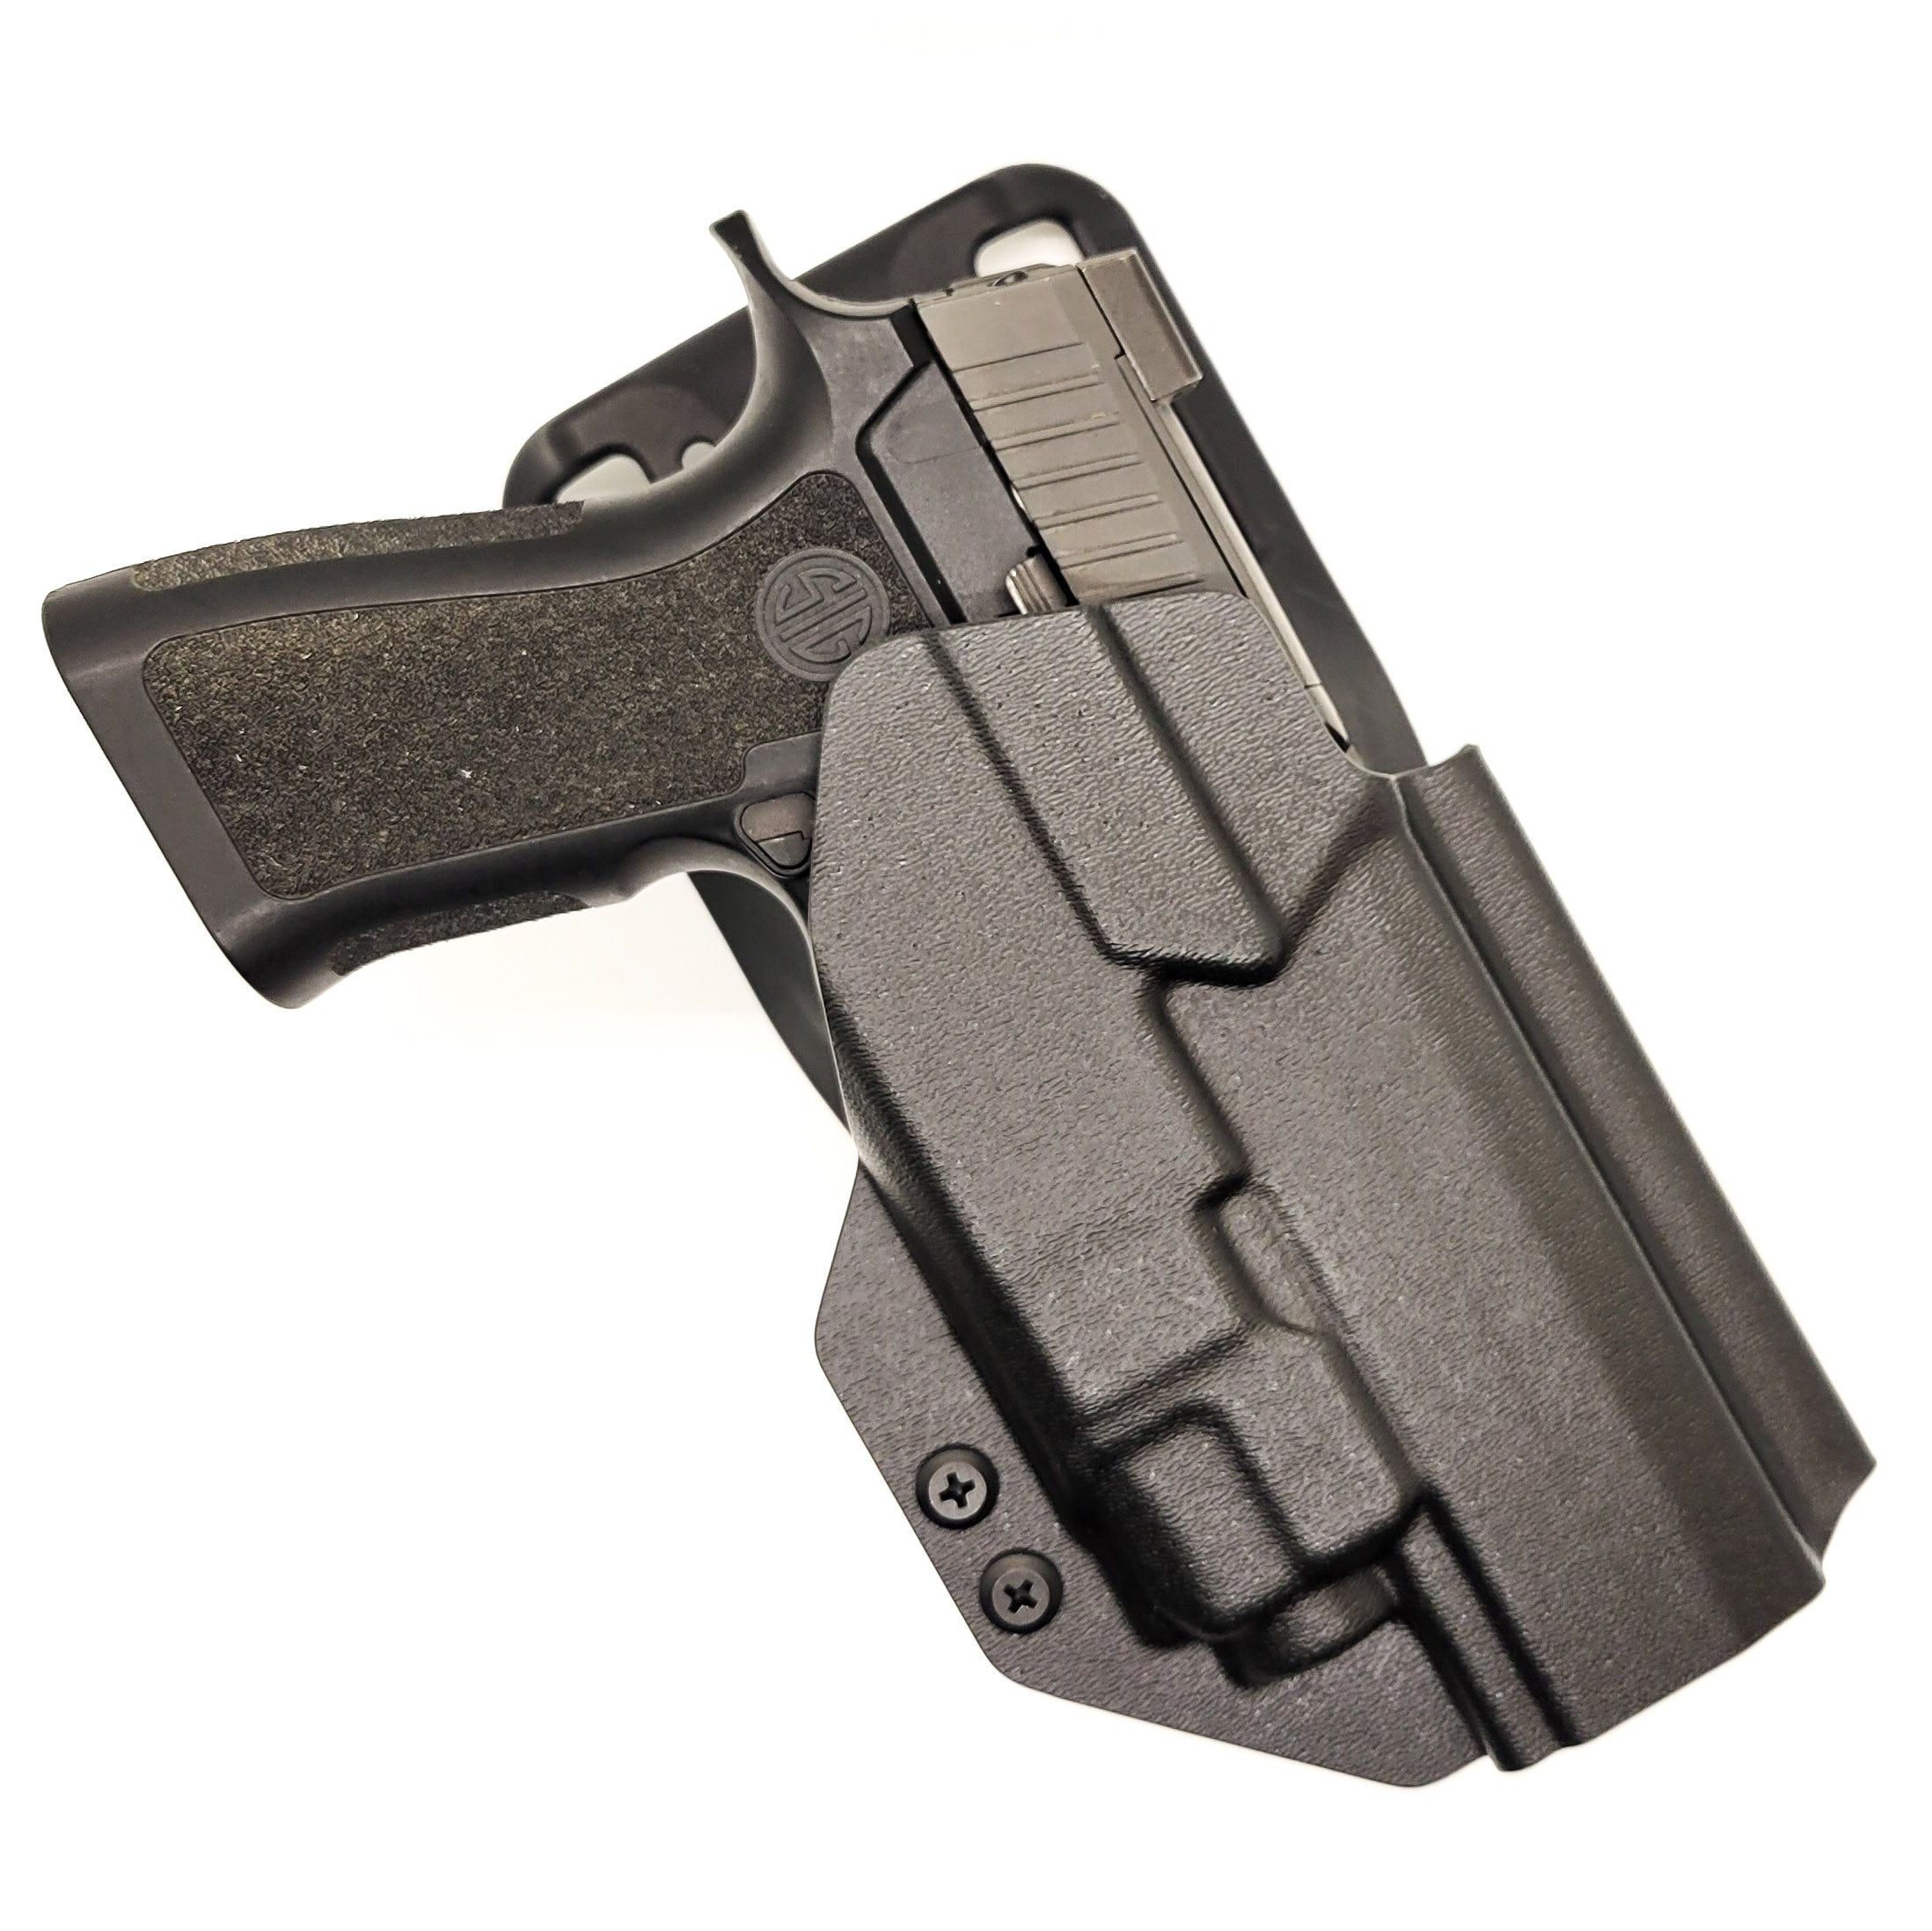 Outside waistband duty/competition style holster designed to fit the Full Size and Carry P320 series with Streamlight TLR-8 and TLR-8A weapon mounted light and Align Tactical Thumb Rest Takedown Lever. Holster will accommodate the M17, M18, and X-Five models as well as the Carry and Compact using our competition belt mounting options. 